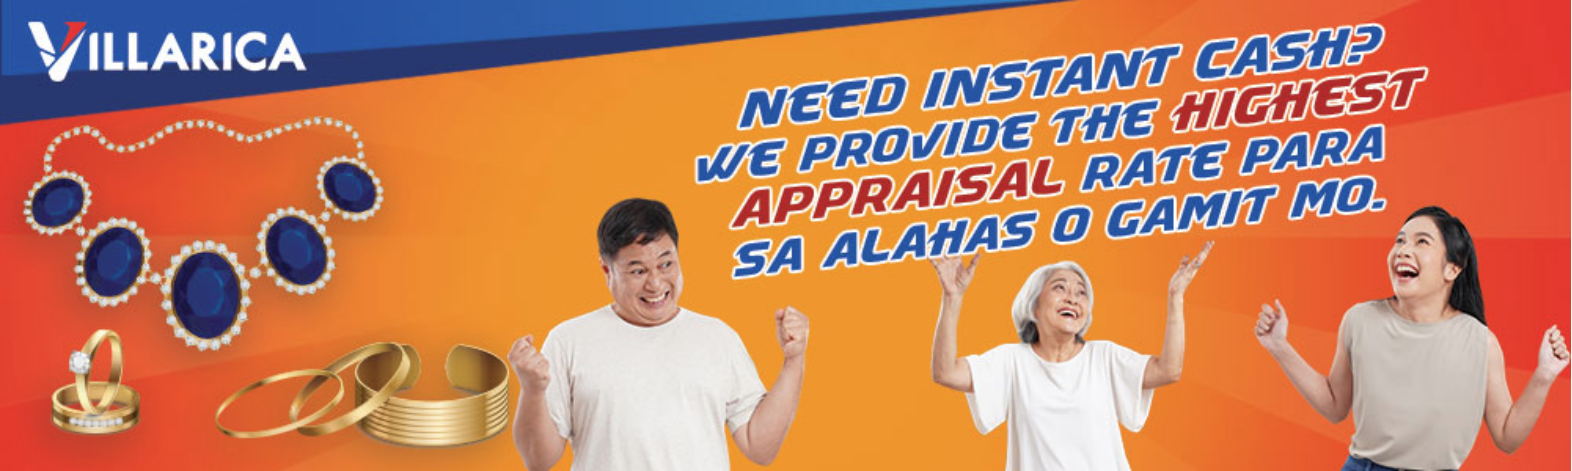 list of pawnshops in the philippines - villarica pawnshop